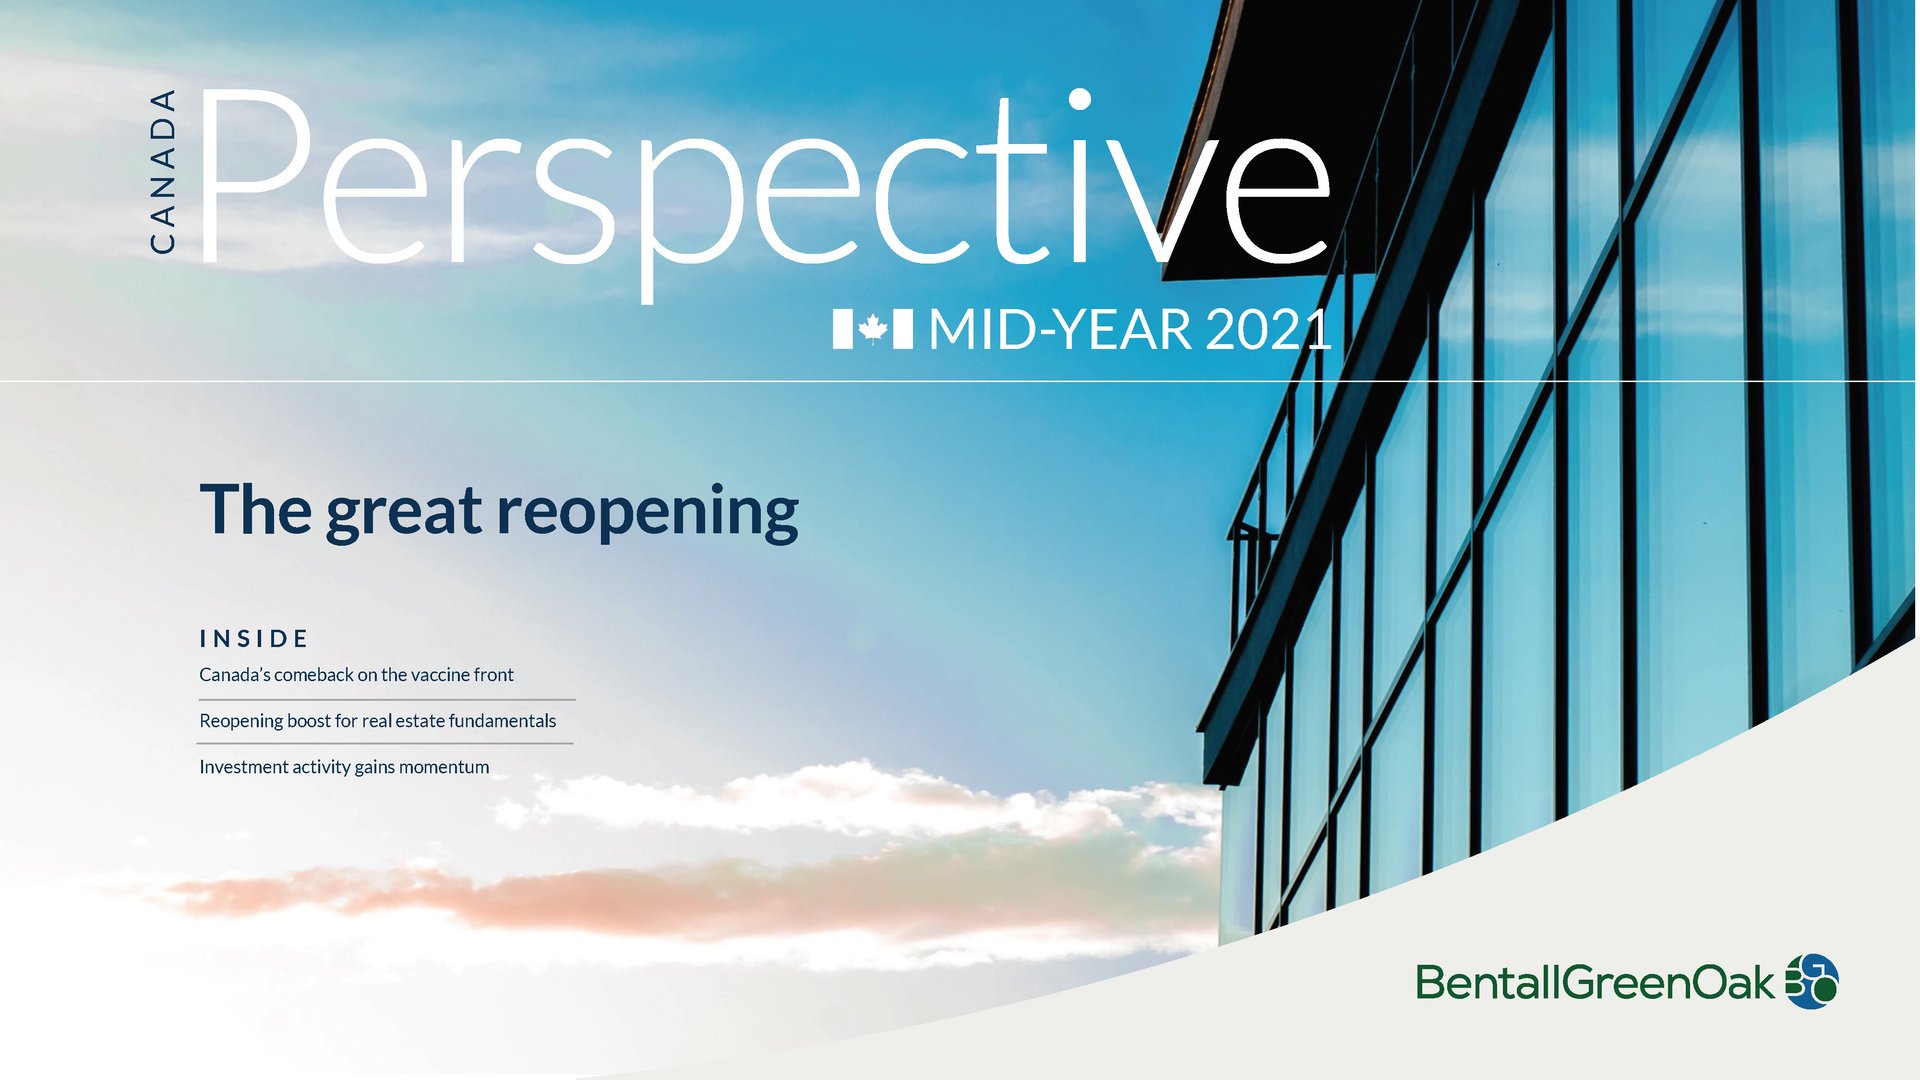 Perspective Canada - Mid-Year 2021